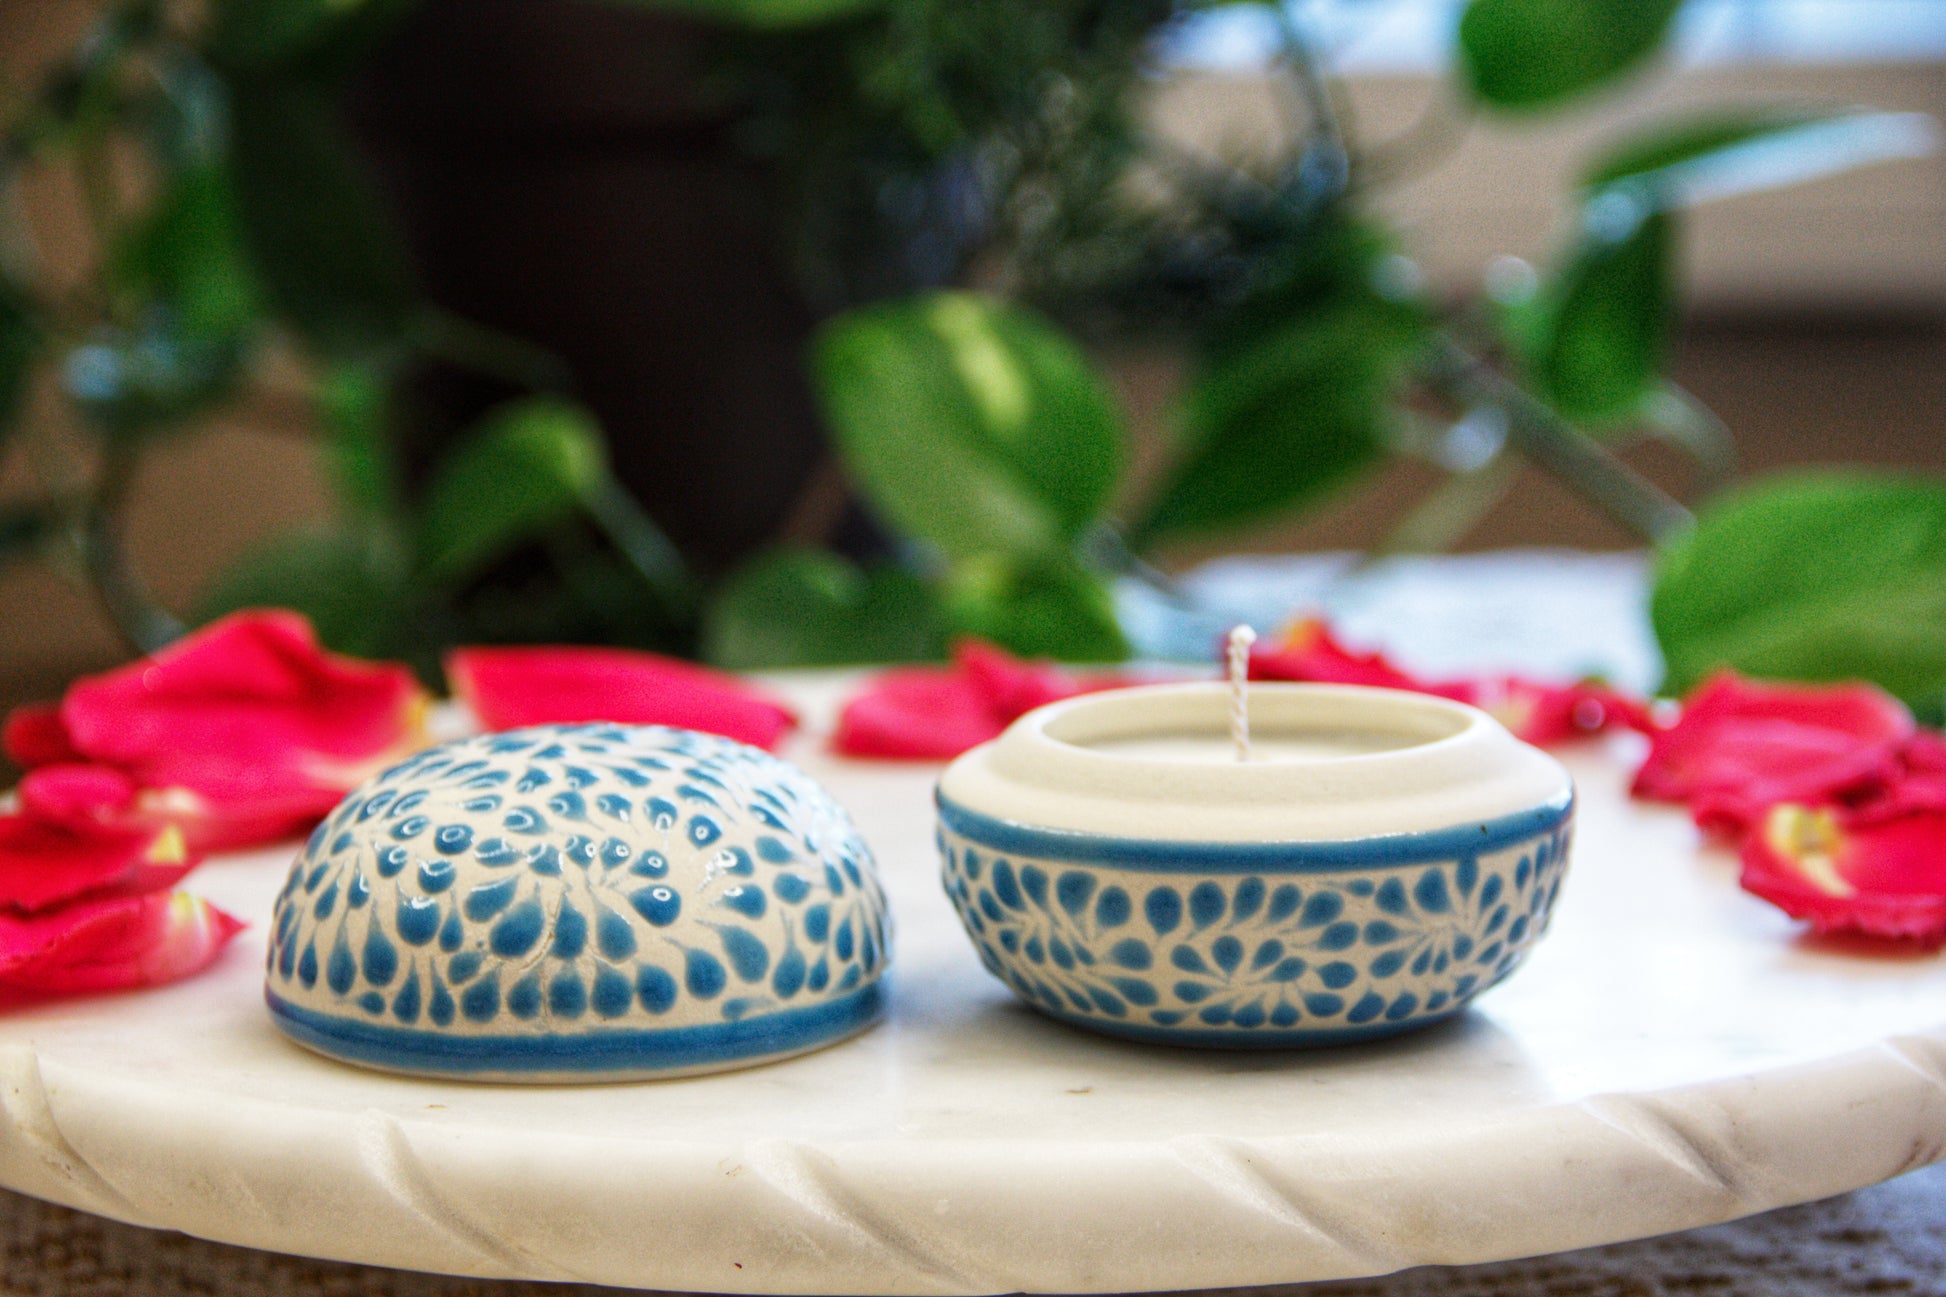 Artisanal candle in a beautiful small talavera cup with a lid. Handmade blue strokes design. Handcrafted by Artisan in Mexico City. 100% All Natural Soy Candle. Reuse the talavera as home decor or storage.